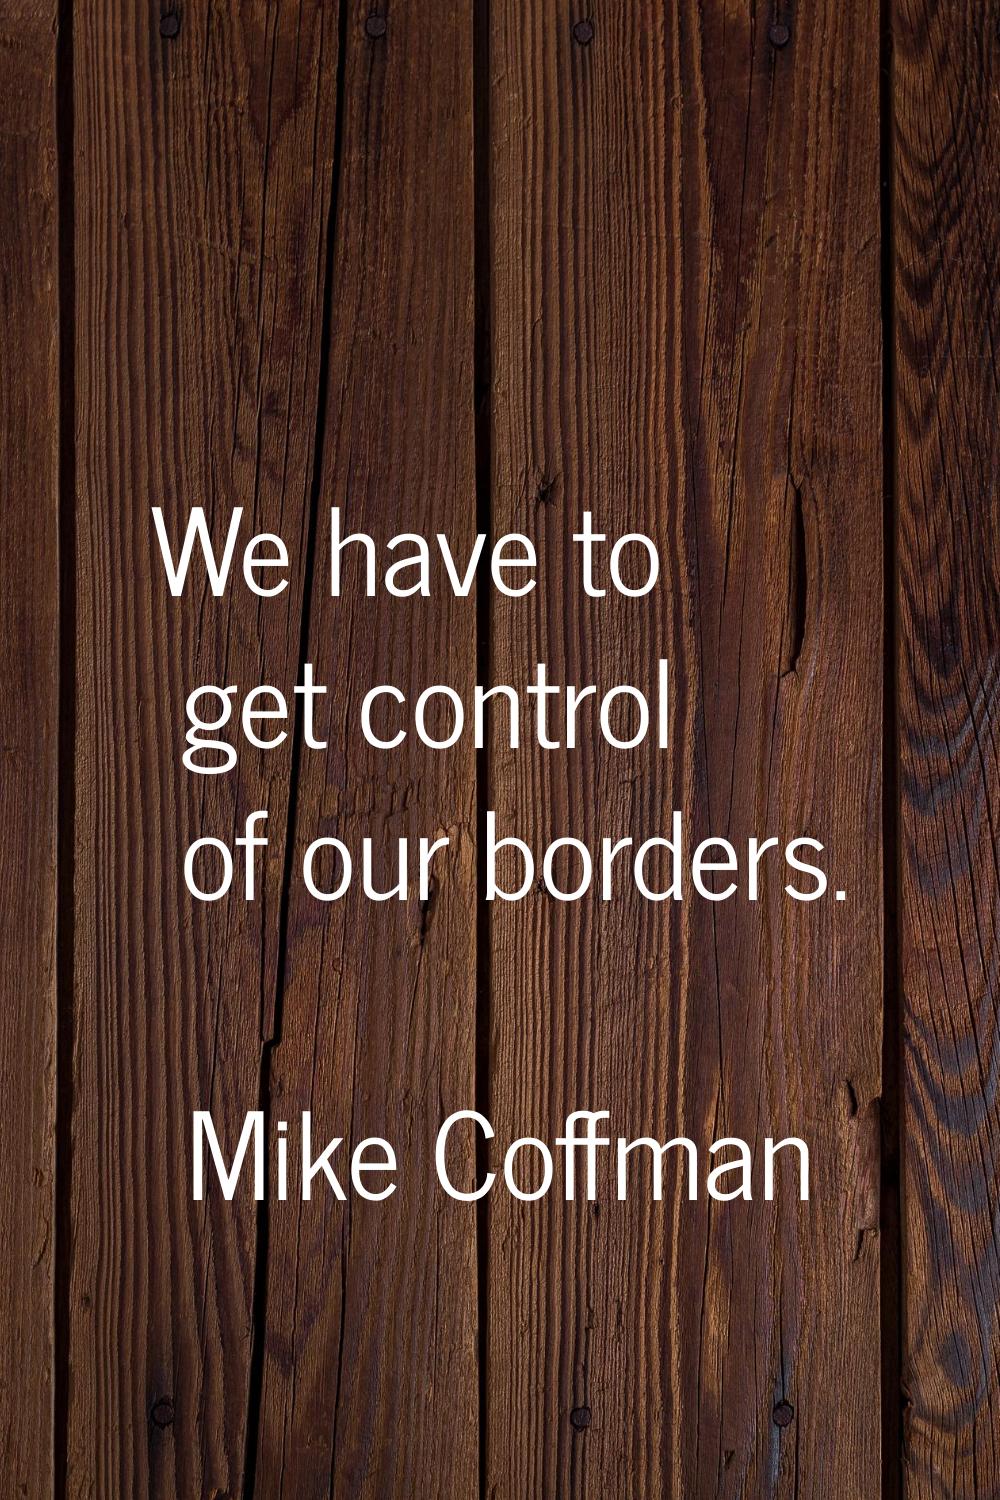 We have to get control of our borders.